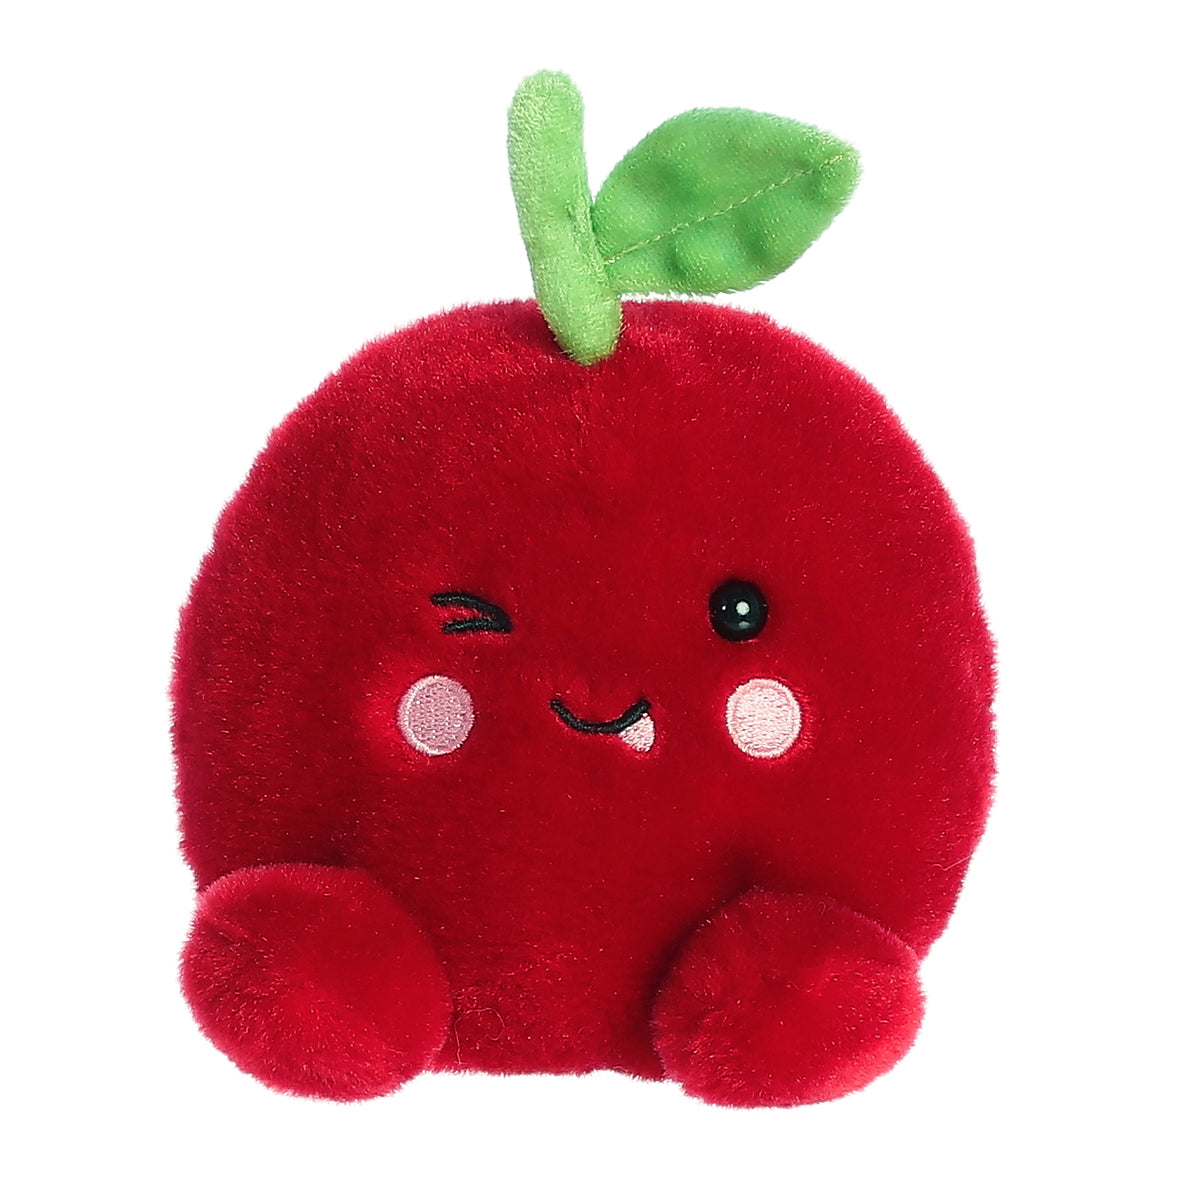 Cherry plush from Palm Pals, vibrant cherry red with exquisite embroidery, designed to resemble the sweet fruit.